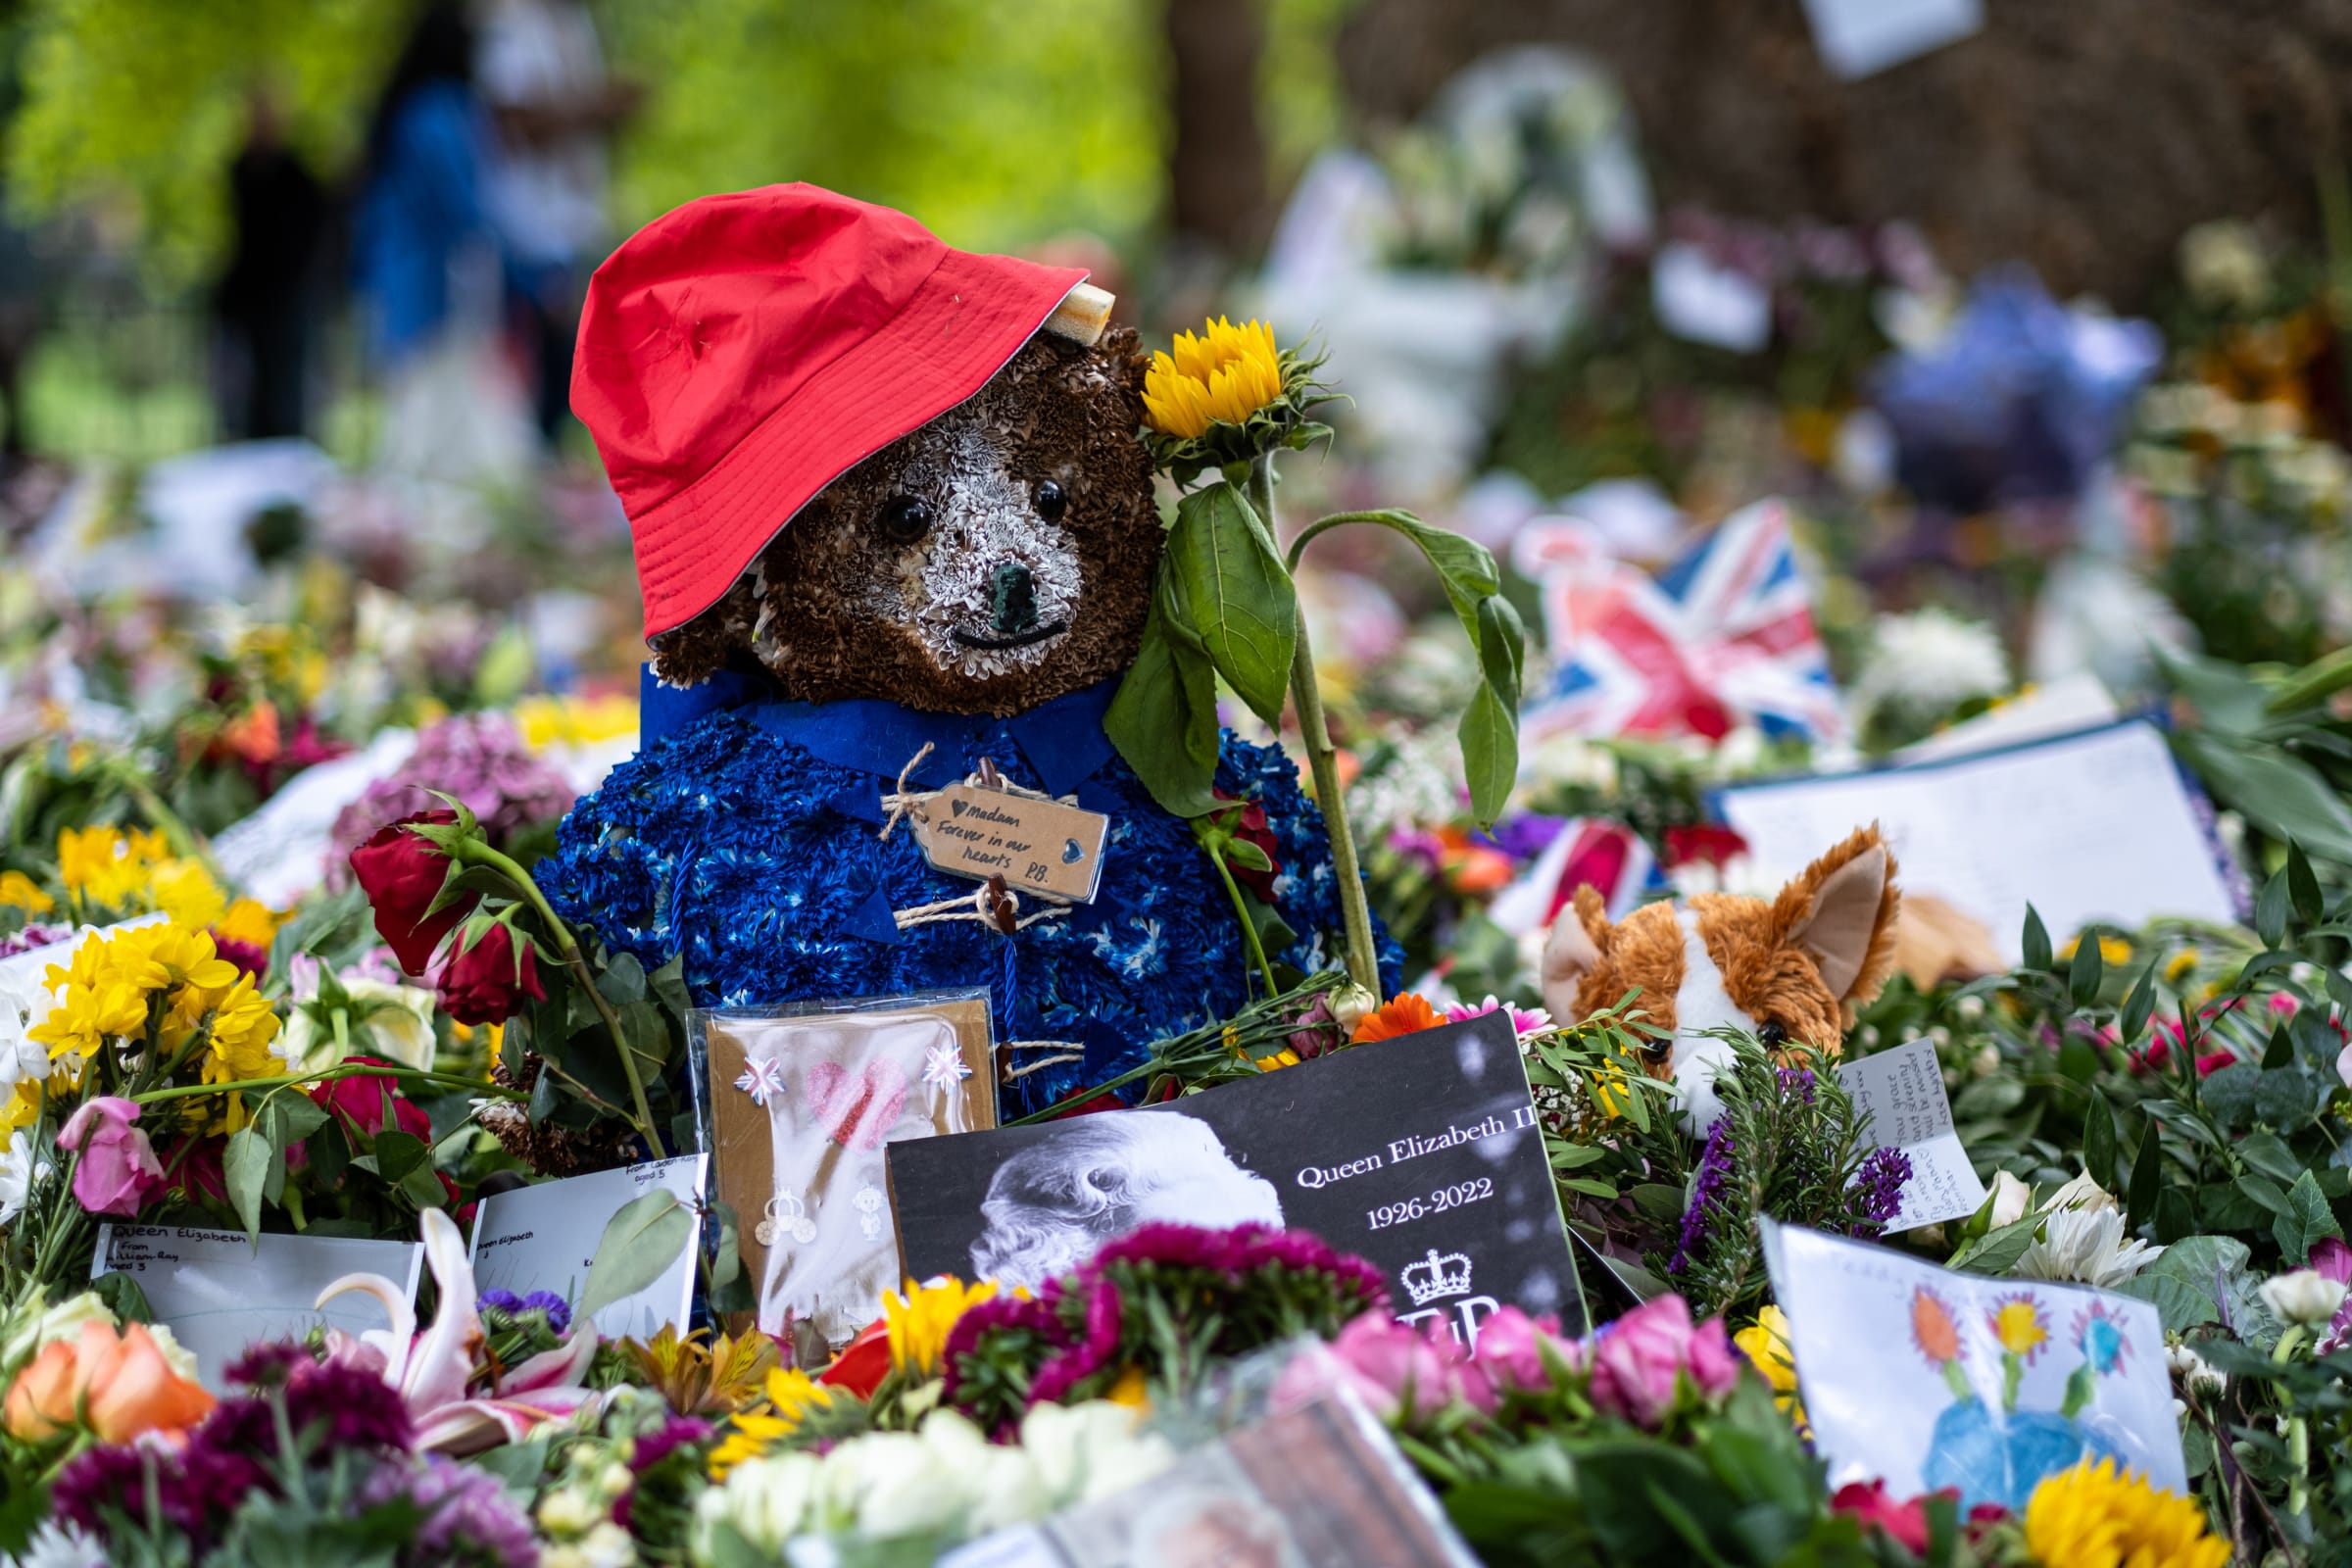 A paddington bear plush sitting in a sea of flowers, with a tiny Union Jack in its breast pocket.